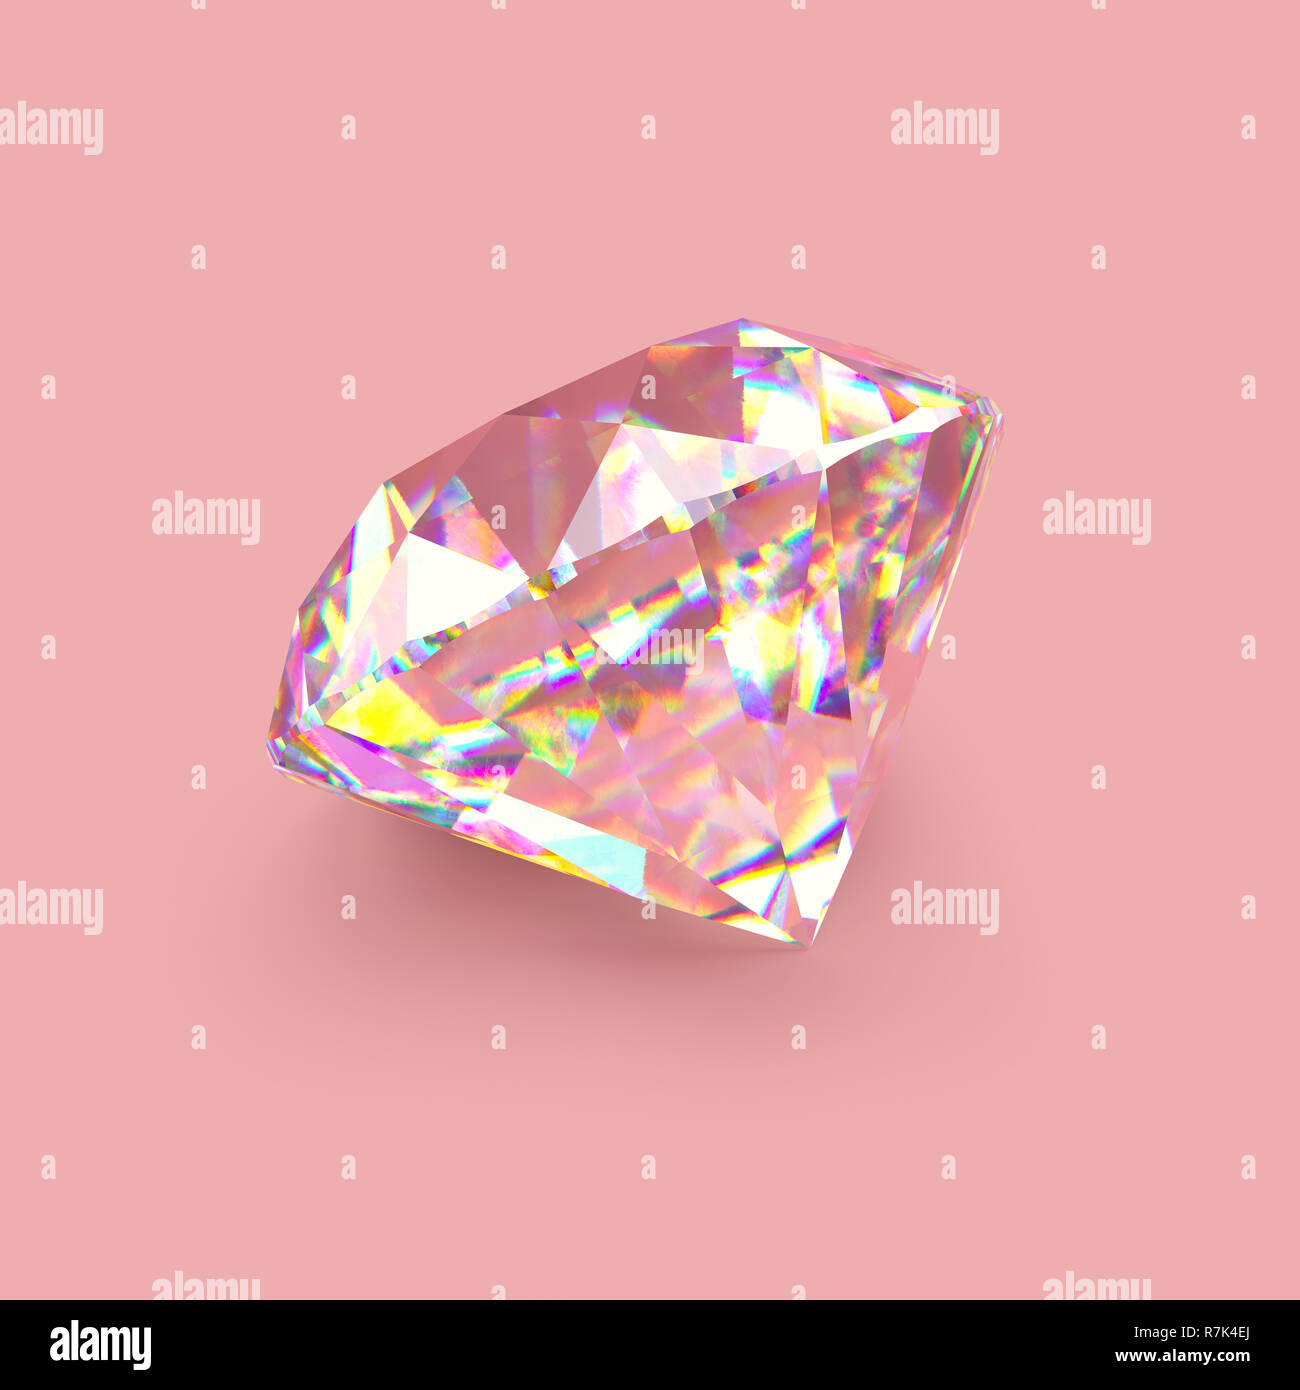 Shiny sparkling realistic diamond on rose gold background. Scratches and imperfections on the surface. 3D rendering. Stock Photo